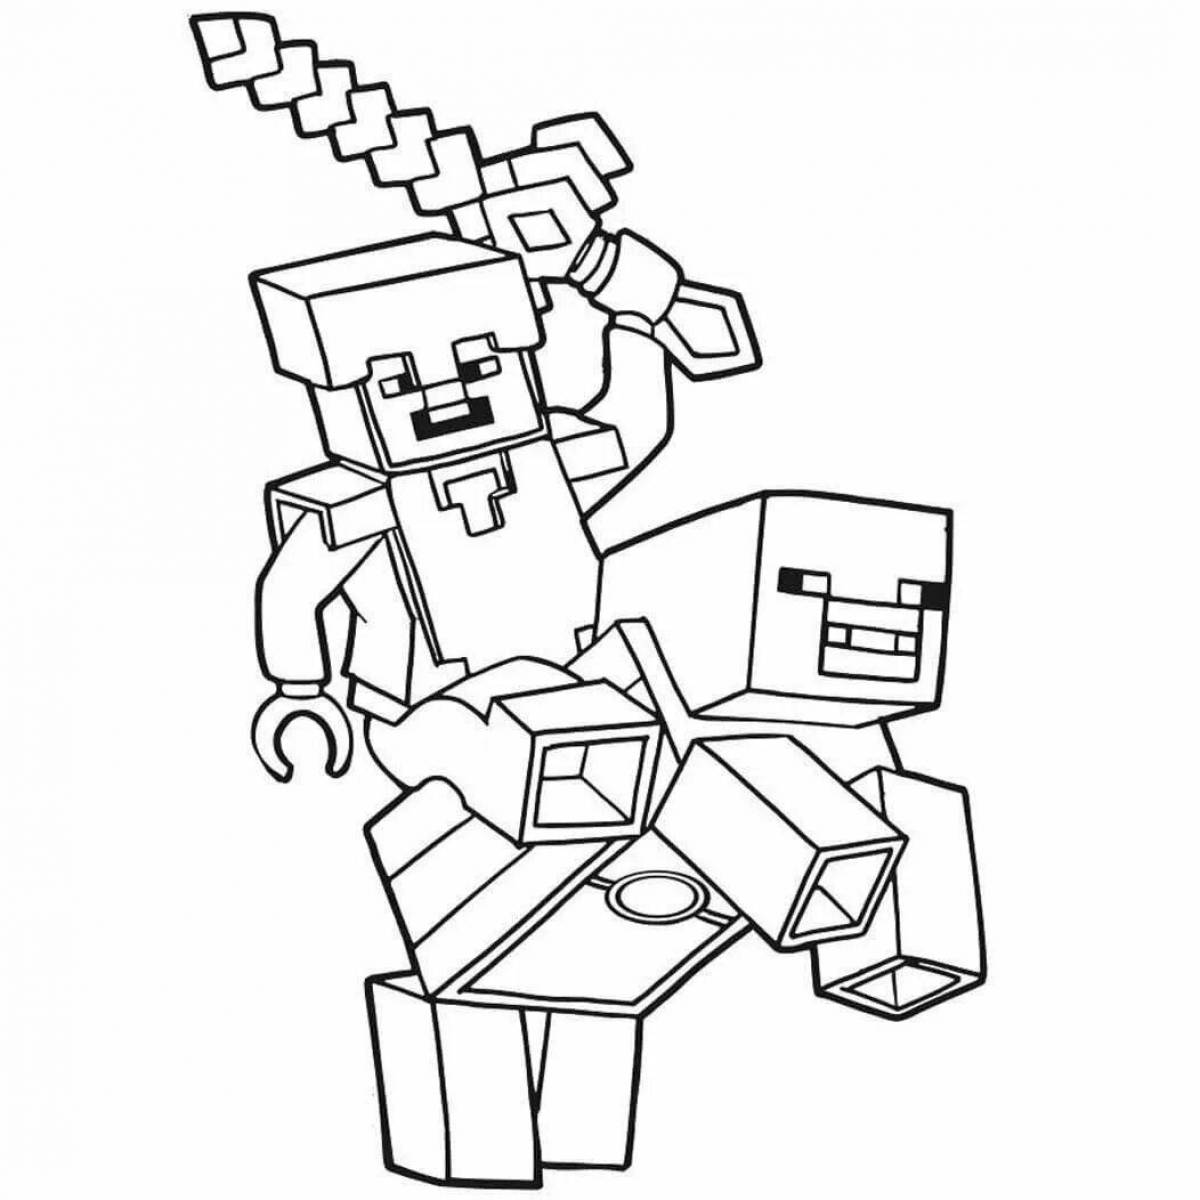 Fascinating minecraft cake coloring page